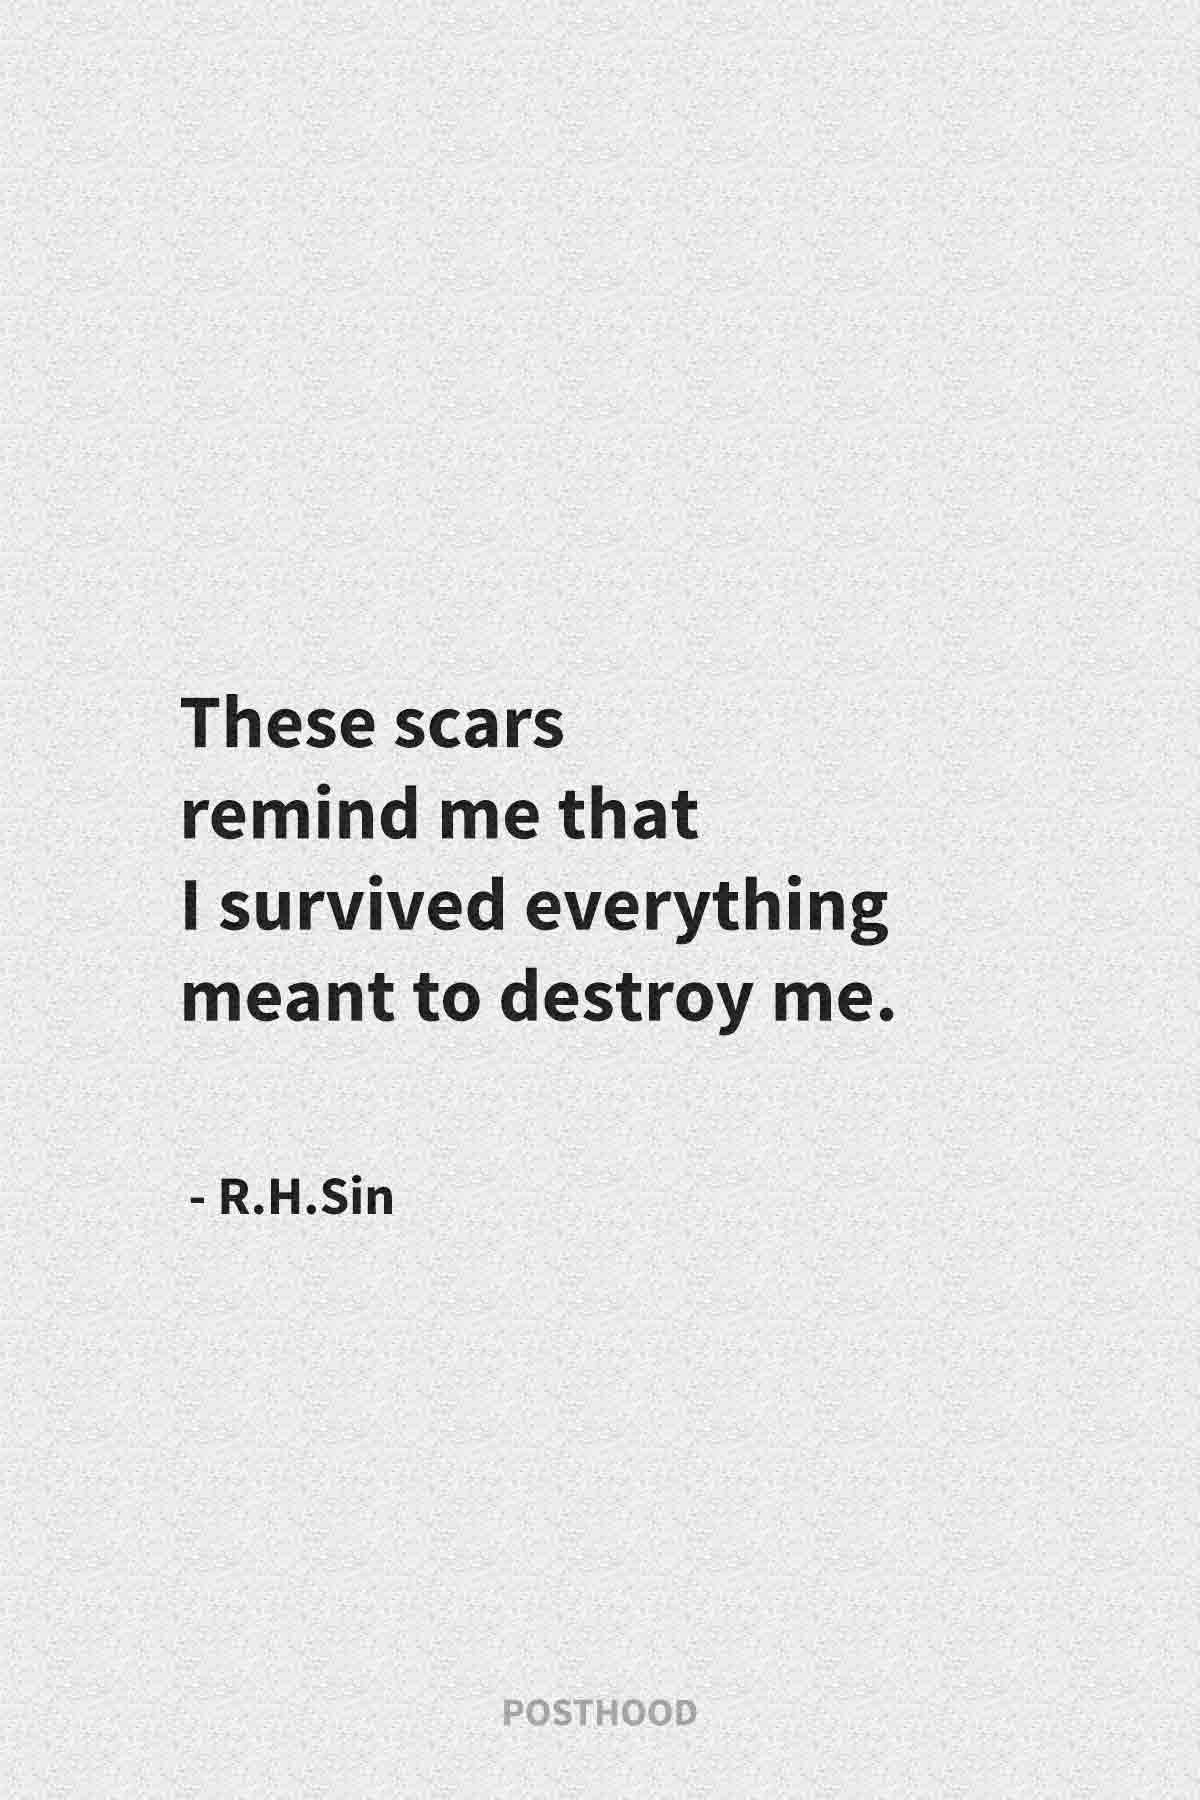 Move on from a toxic relationship with these powerful and inspirational R.H.Sin quotes that guaranteed strengthen you.